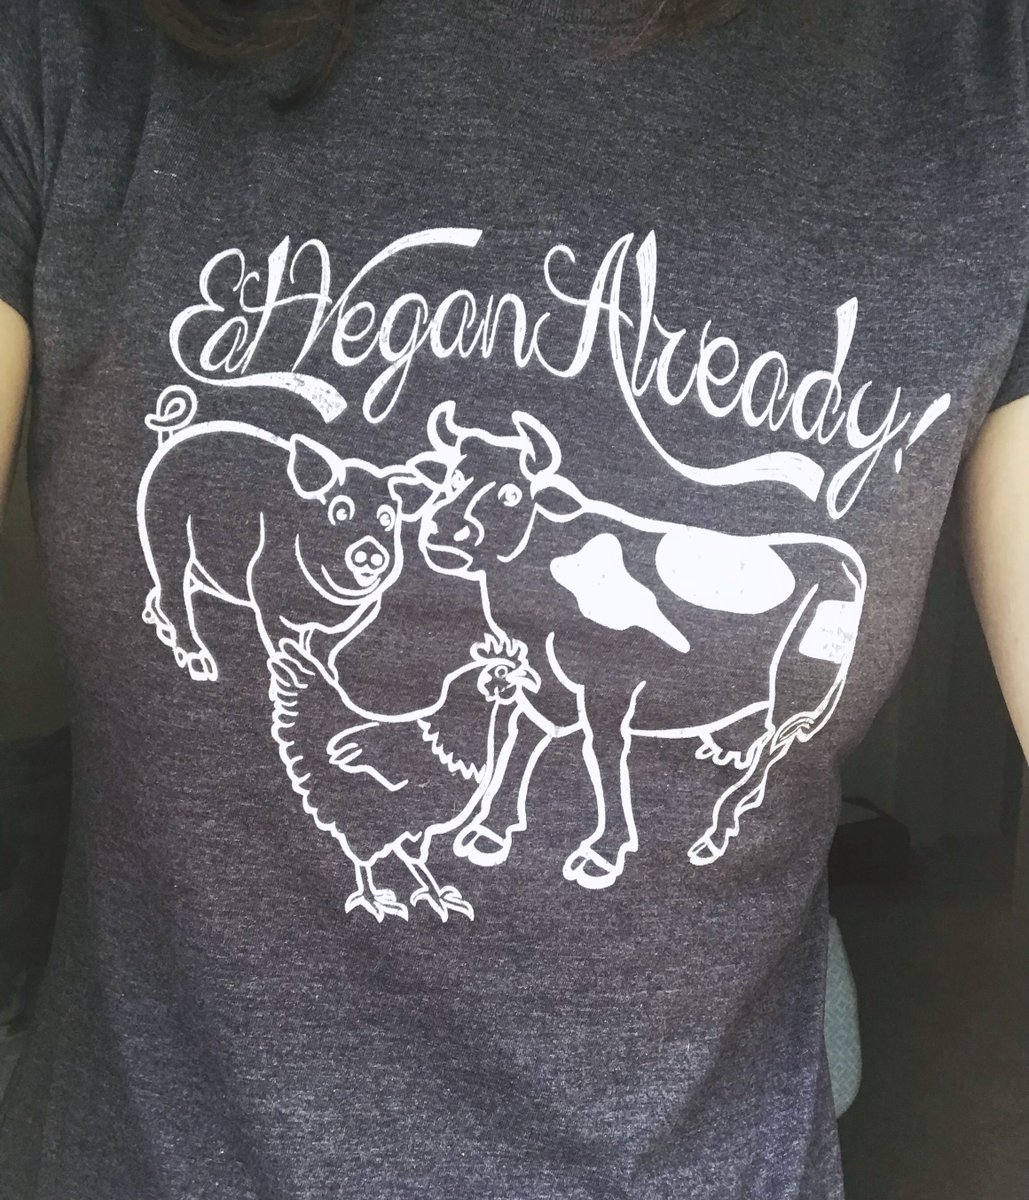 Check out Gabrielle (insta:gabriellerachelc) rocking the Eat Vegan Already tee from our store! Available in 5 colors! Get it here 👉 ow.ly/F8Lb30jY92c